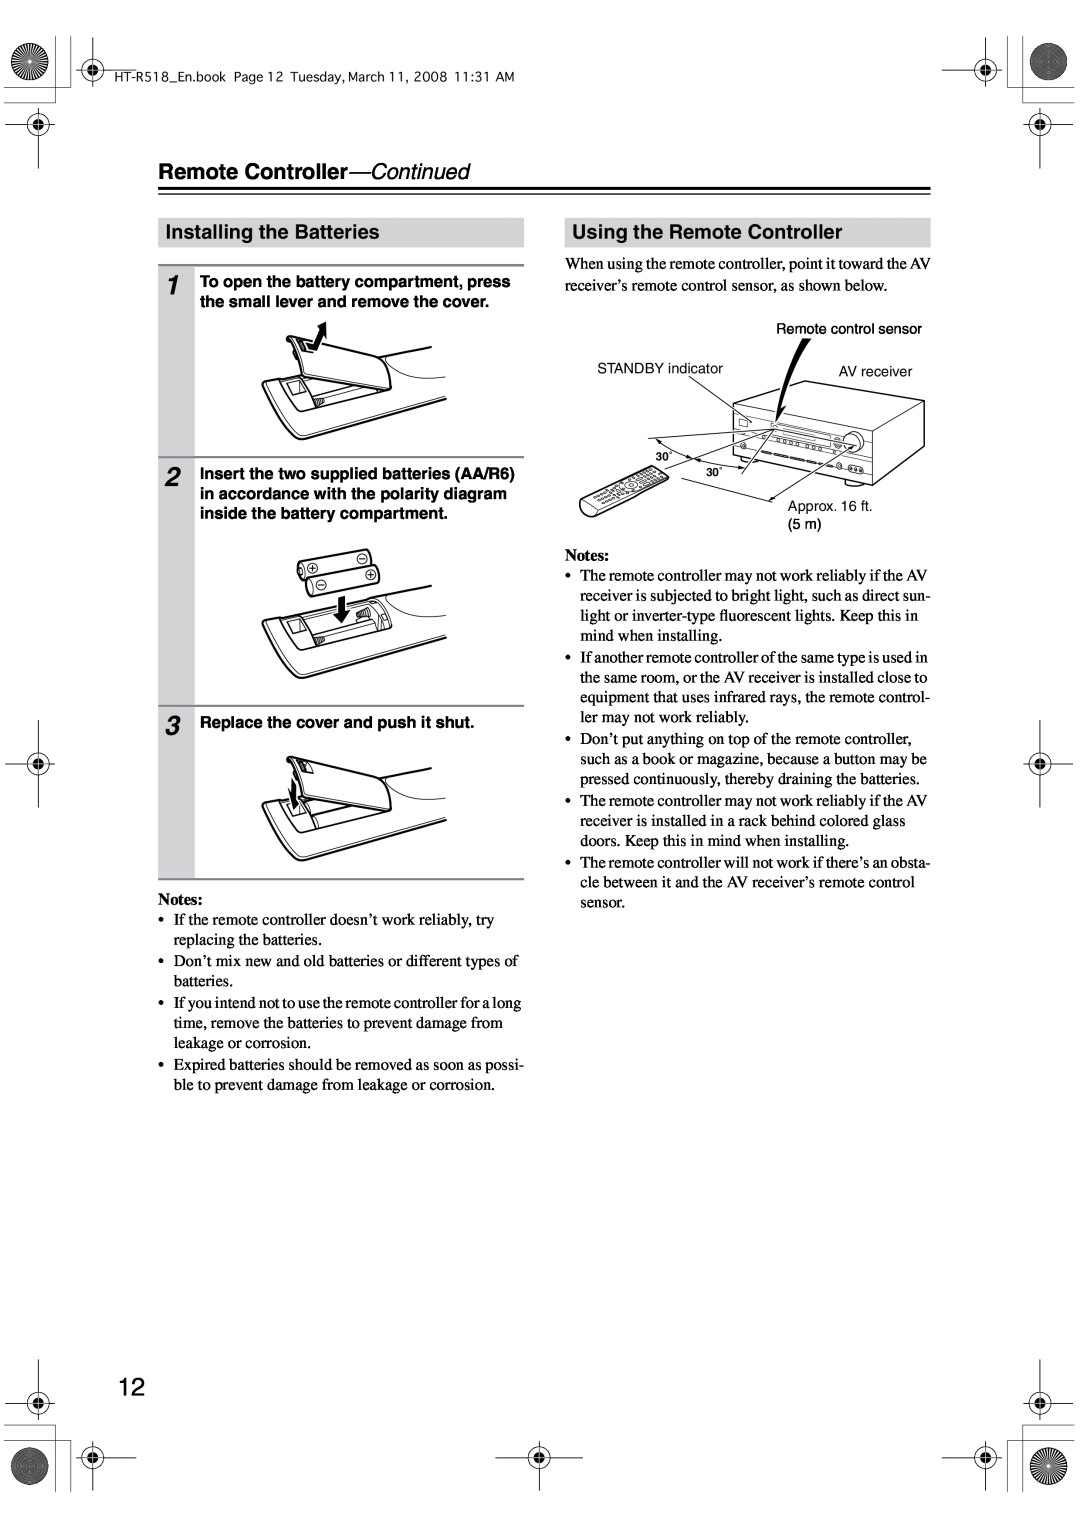 Onkyo HT-R518 instruction manual Remote Controller-Continued, Installing the Batteries, Using the Remote Controller 